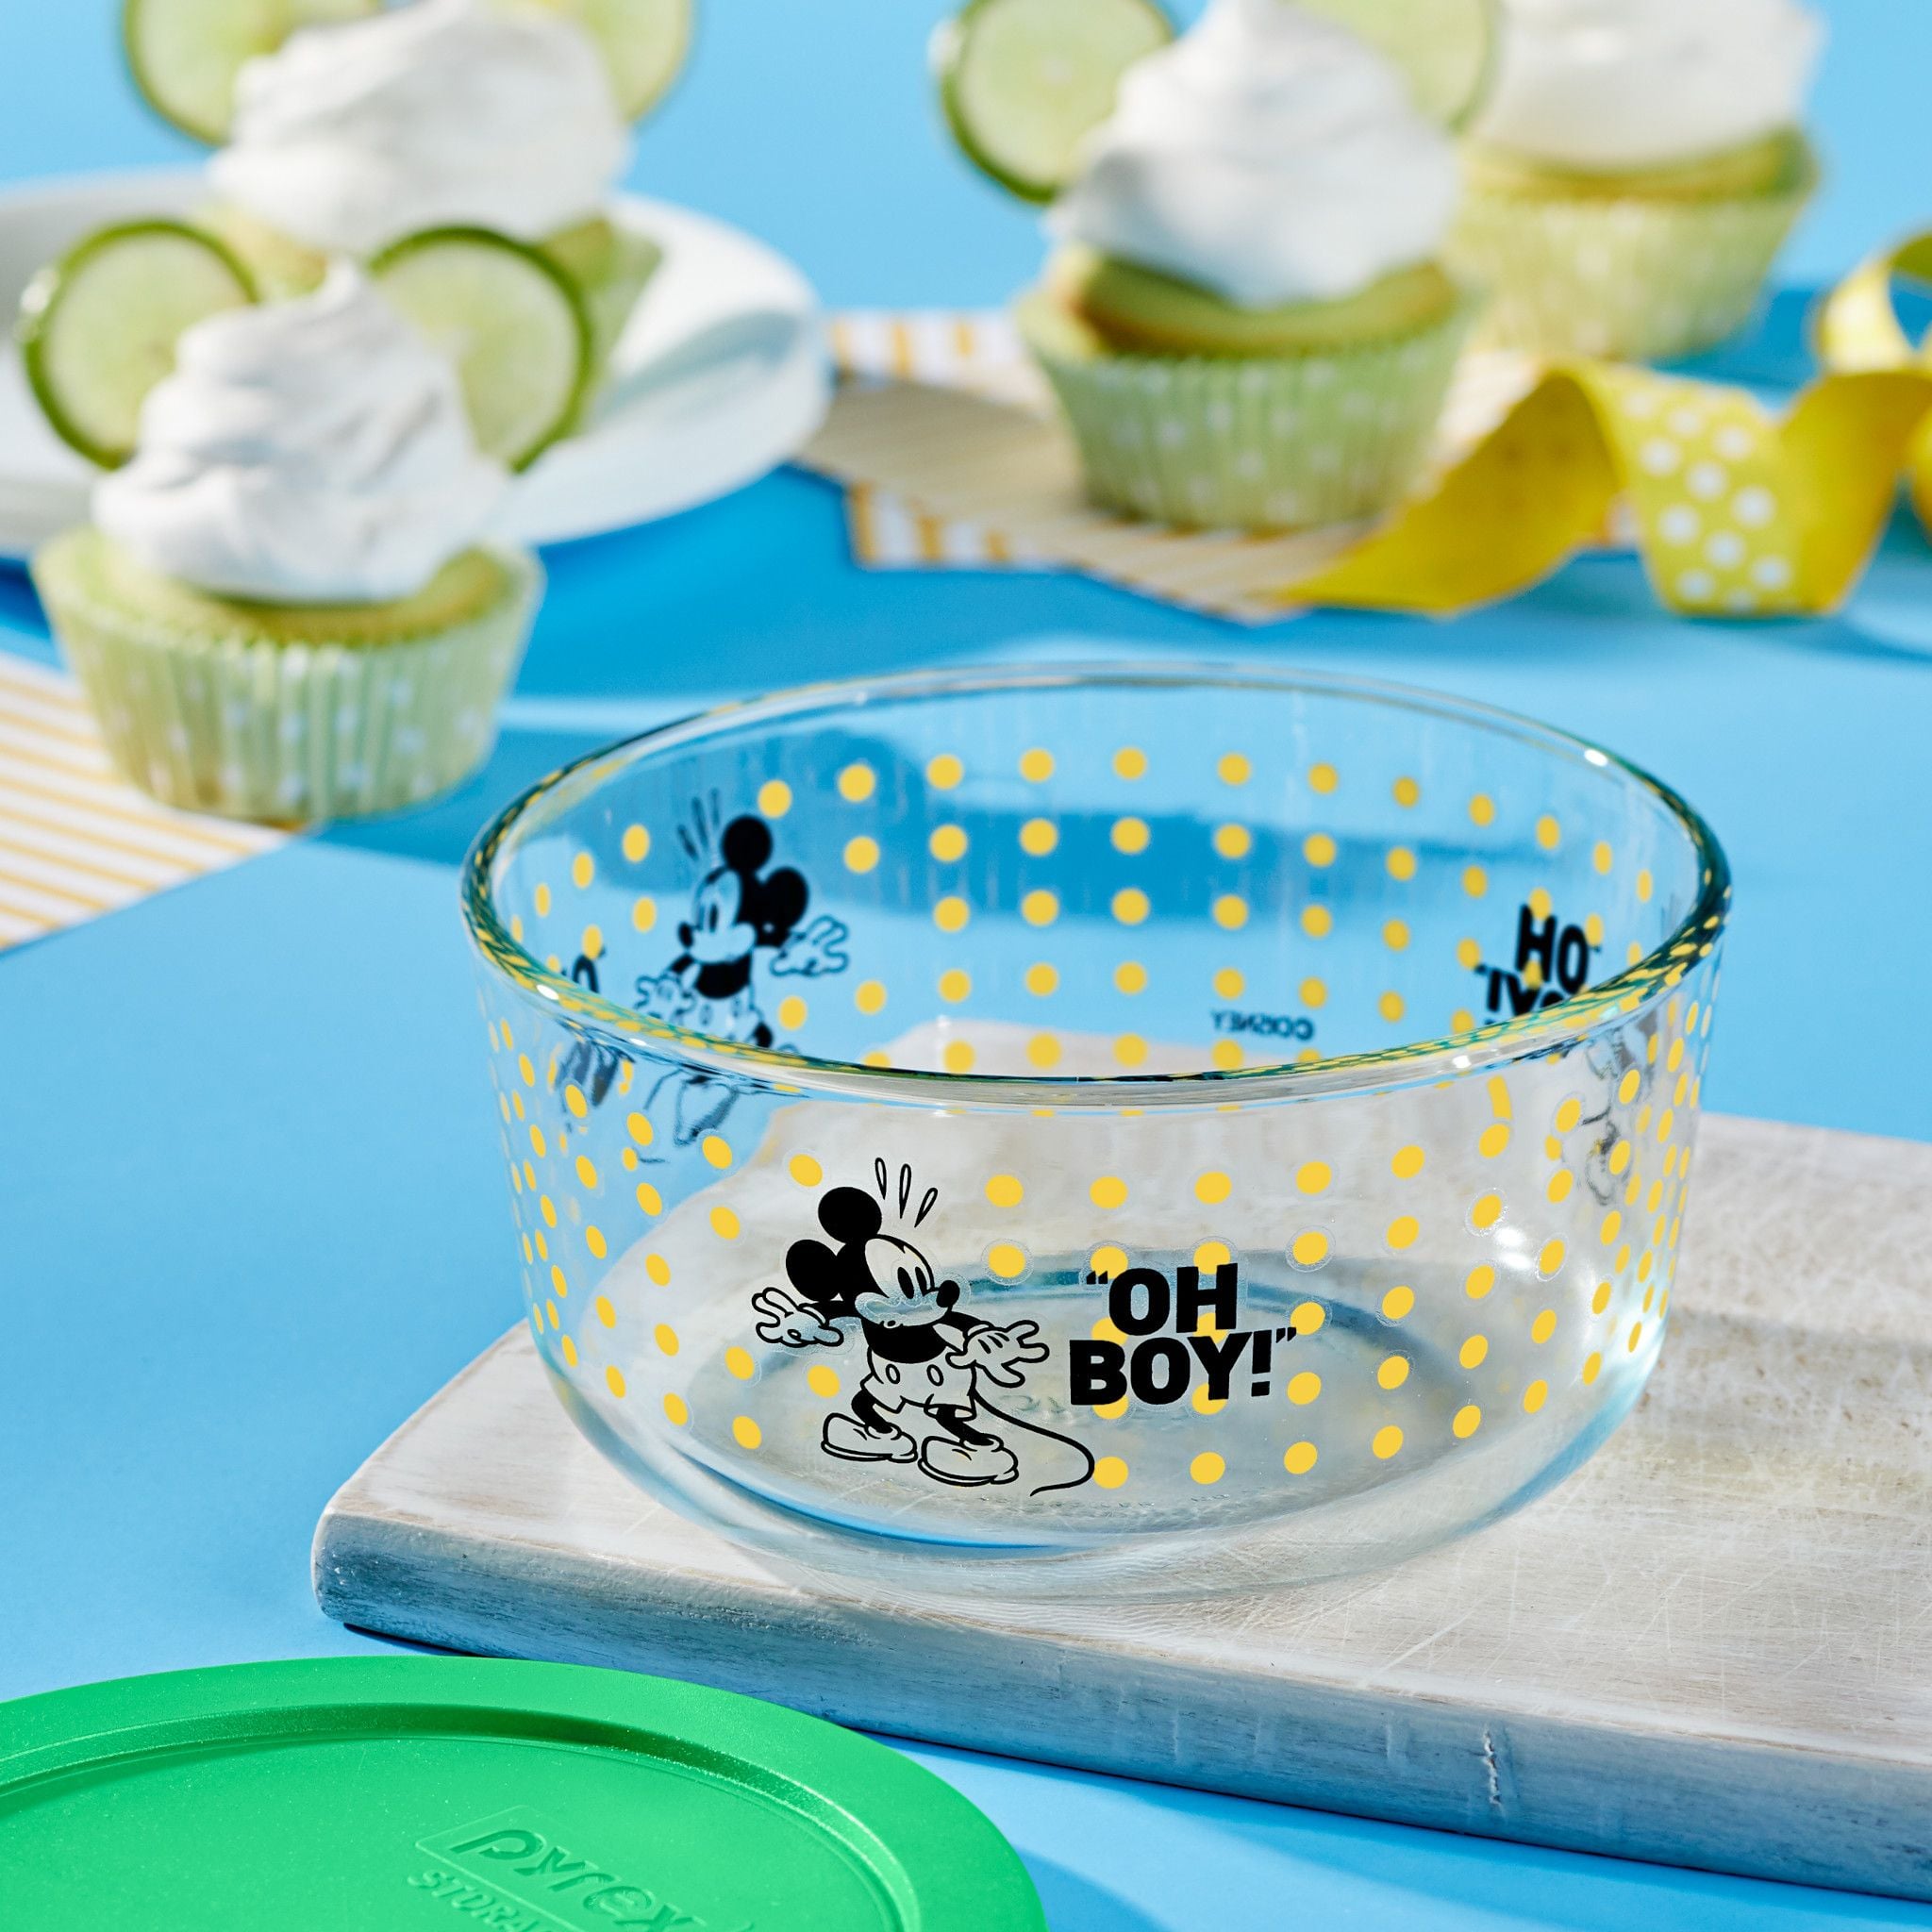 Pyrex Is Now Selling a Special Edition Mickey Mouse Collection